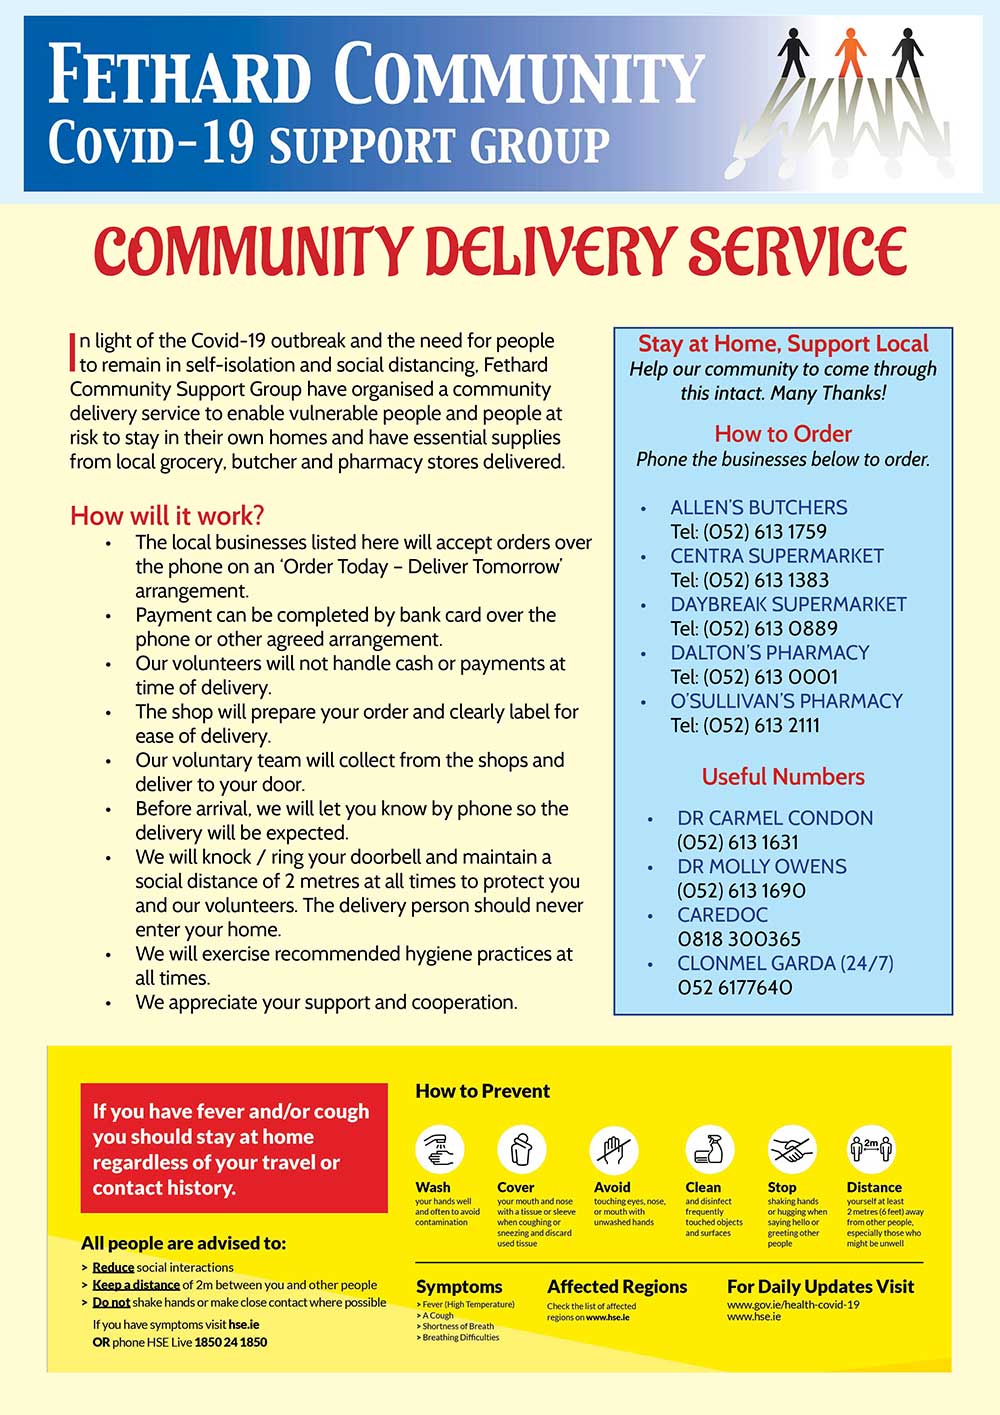 Fethard Community Support Delivery Service will deliver to your door.